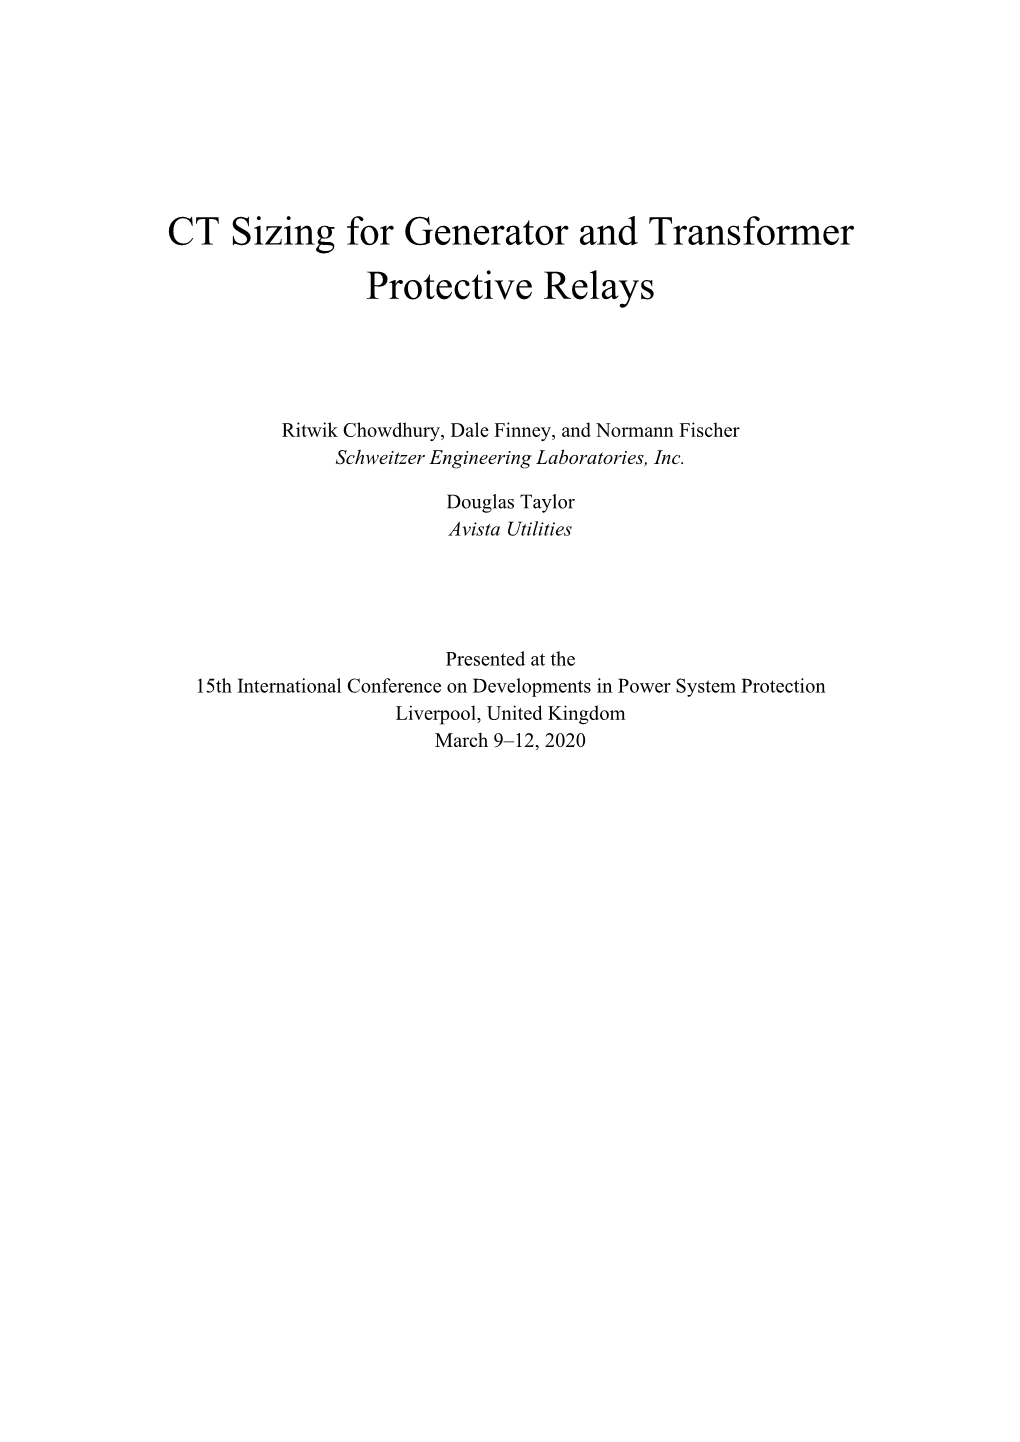 CT Sizing for Generator and Transformer Protective Relays